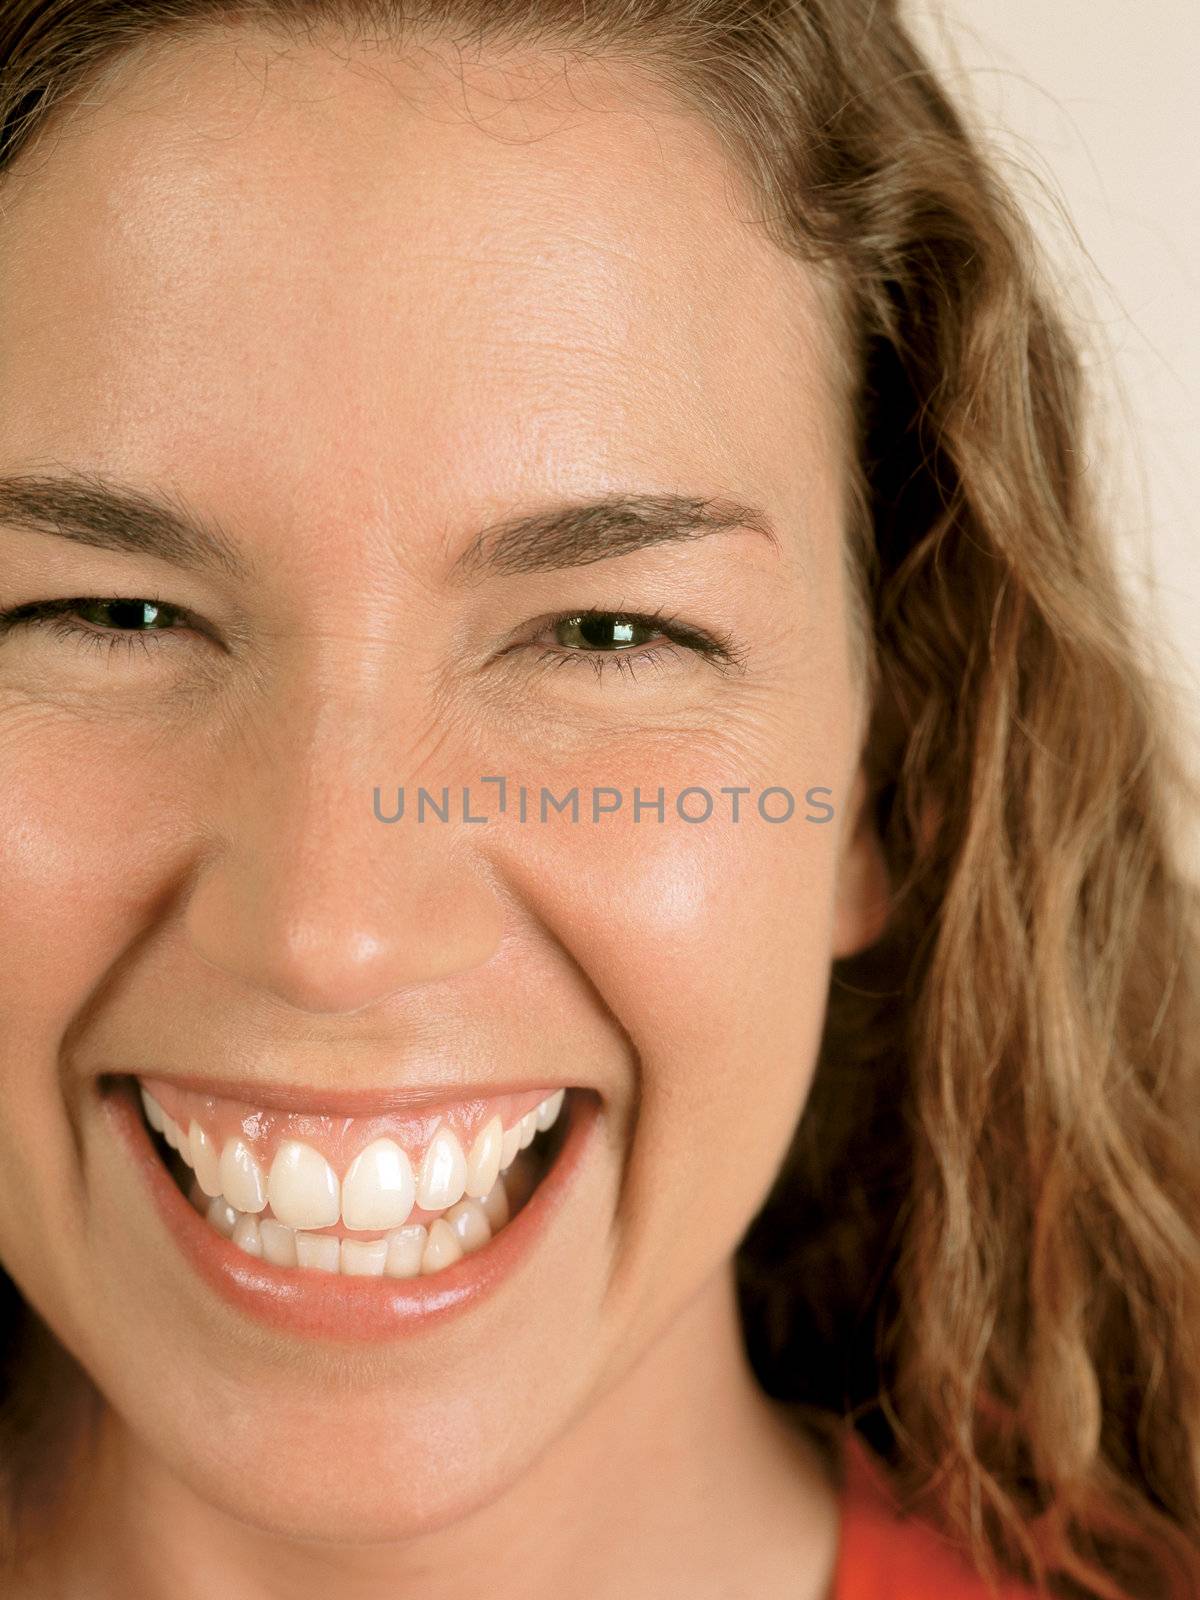 Closeup of a naturally beautiful woman with green eyes laughing.
